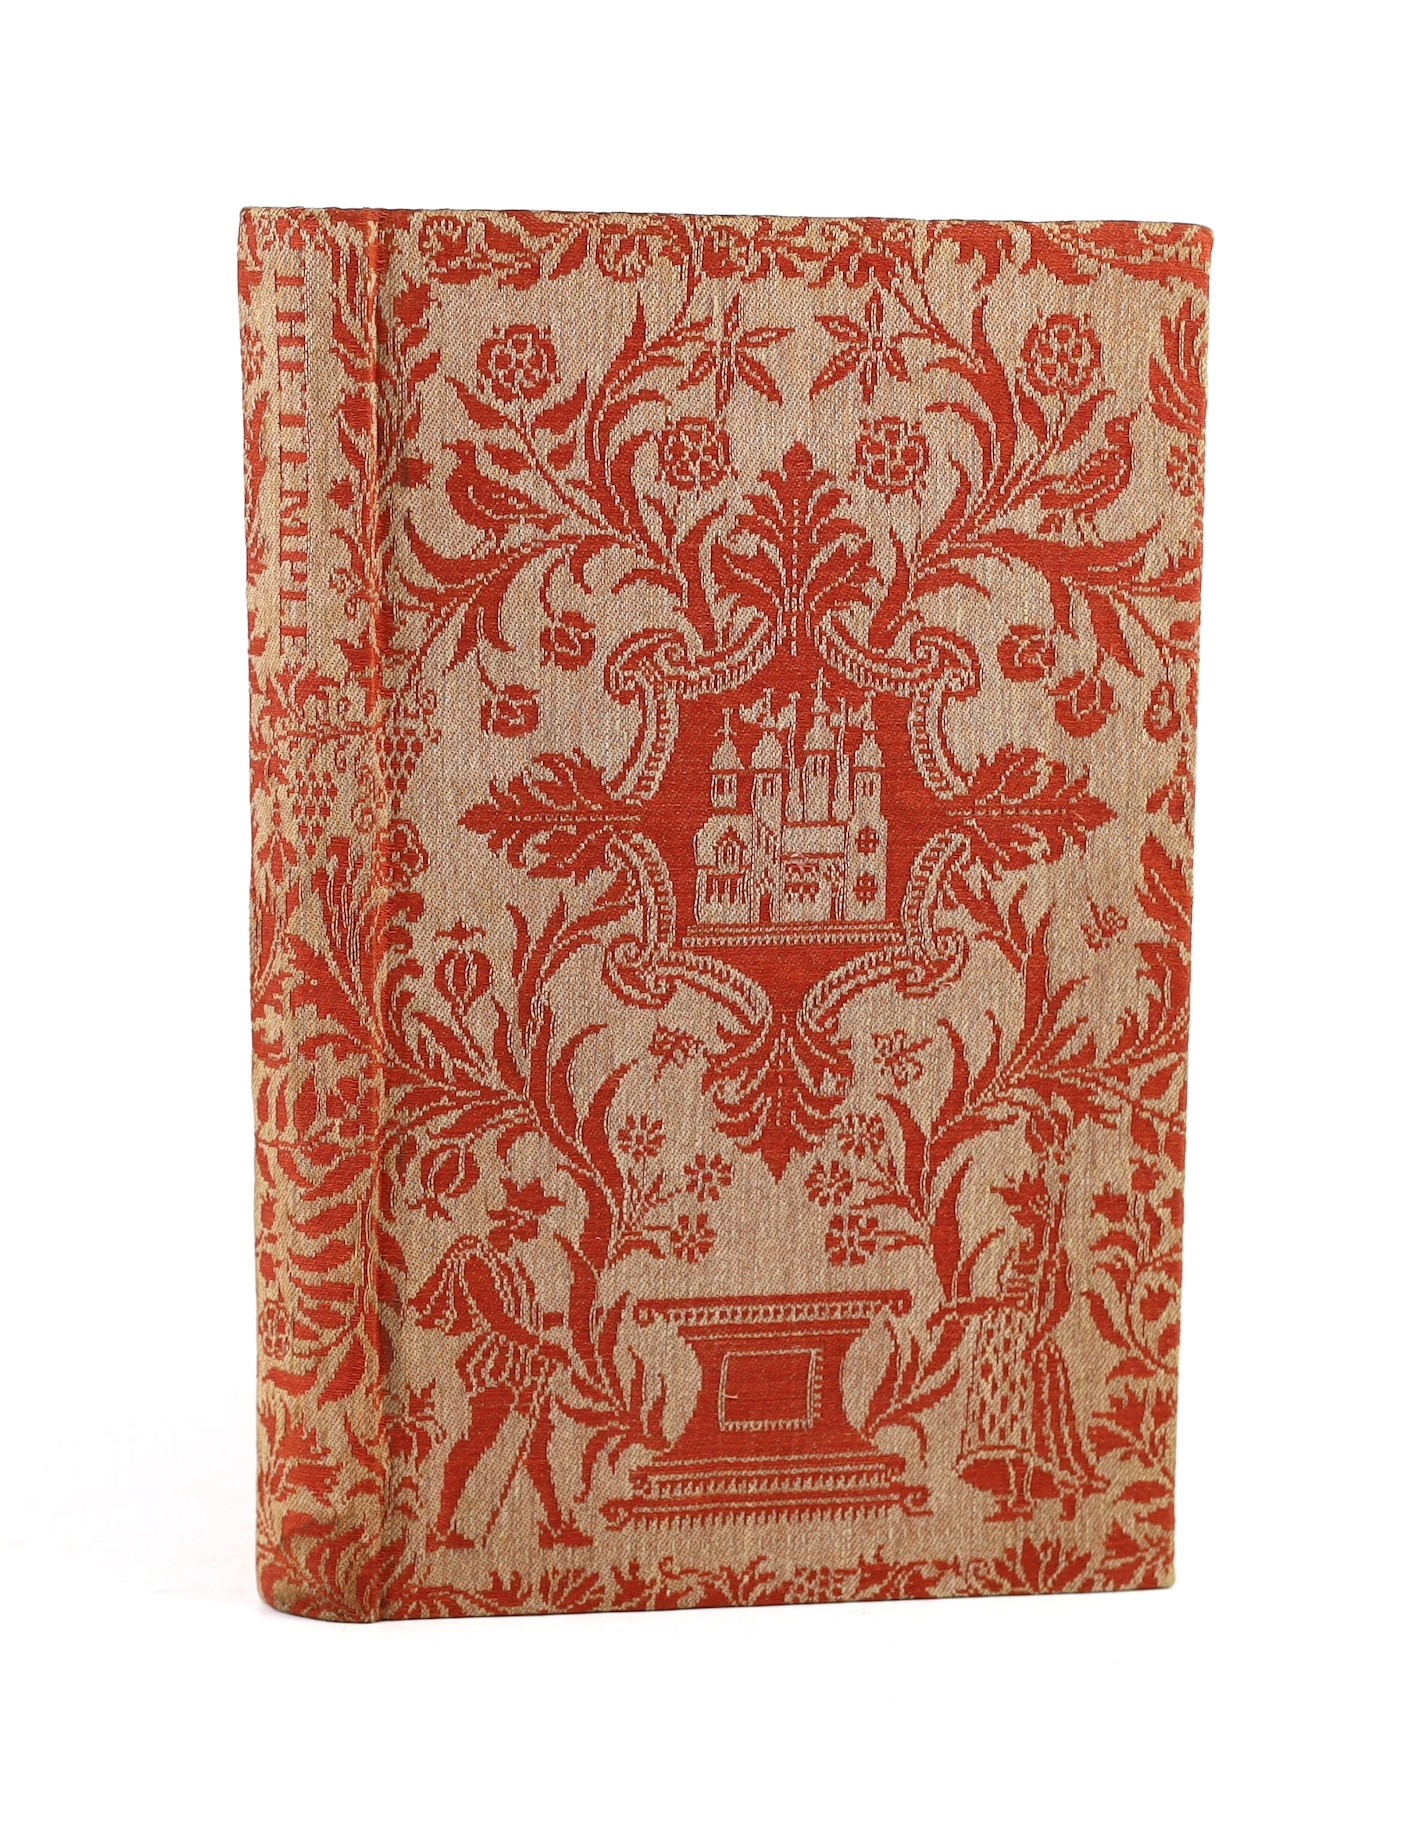 Herbert, George - The Temple; Sacred Poems and Private Ejaculations, one of 1500, 8vo, red brocade covered boards, Nonesuch Press, London, 1927